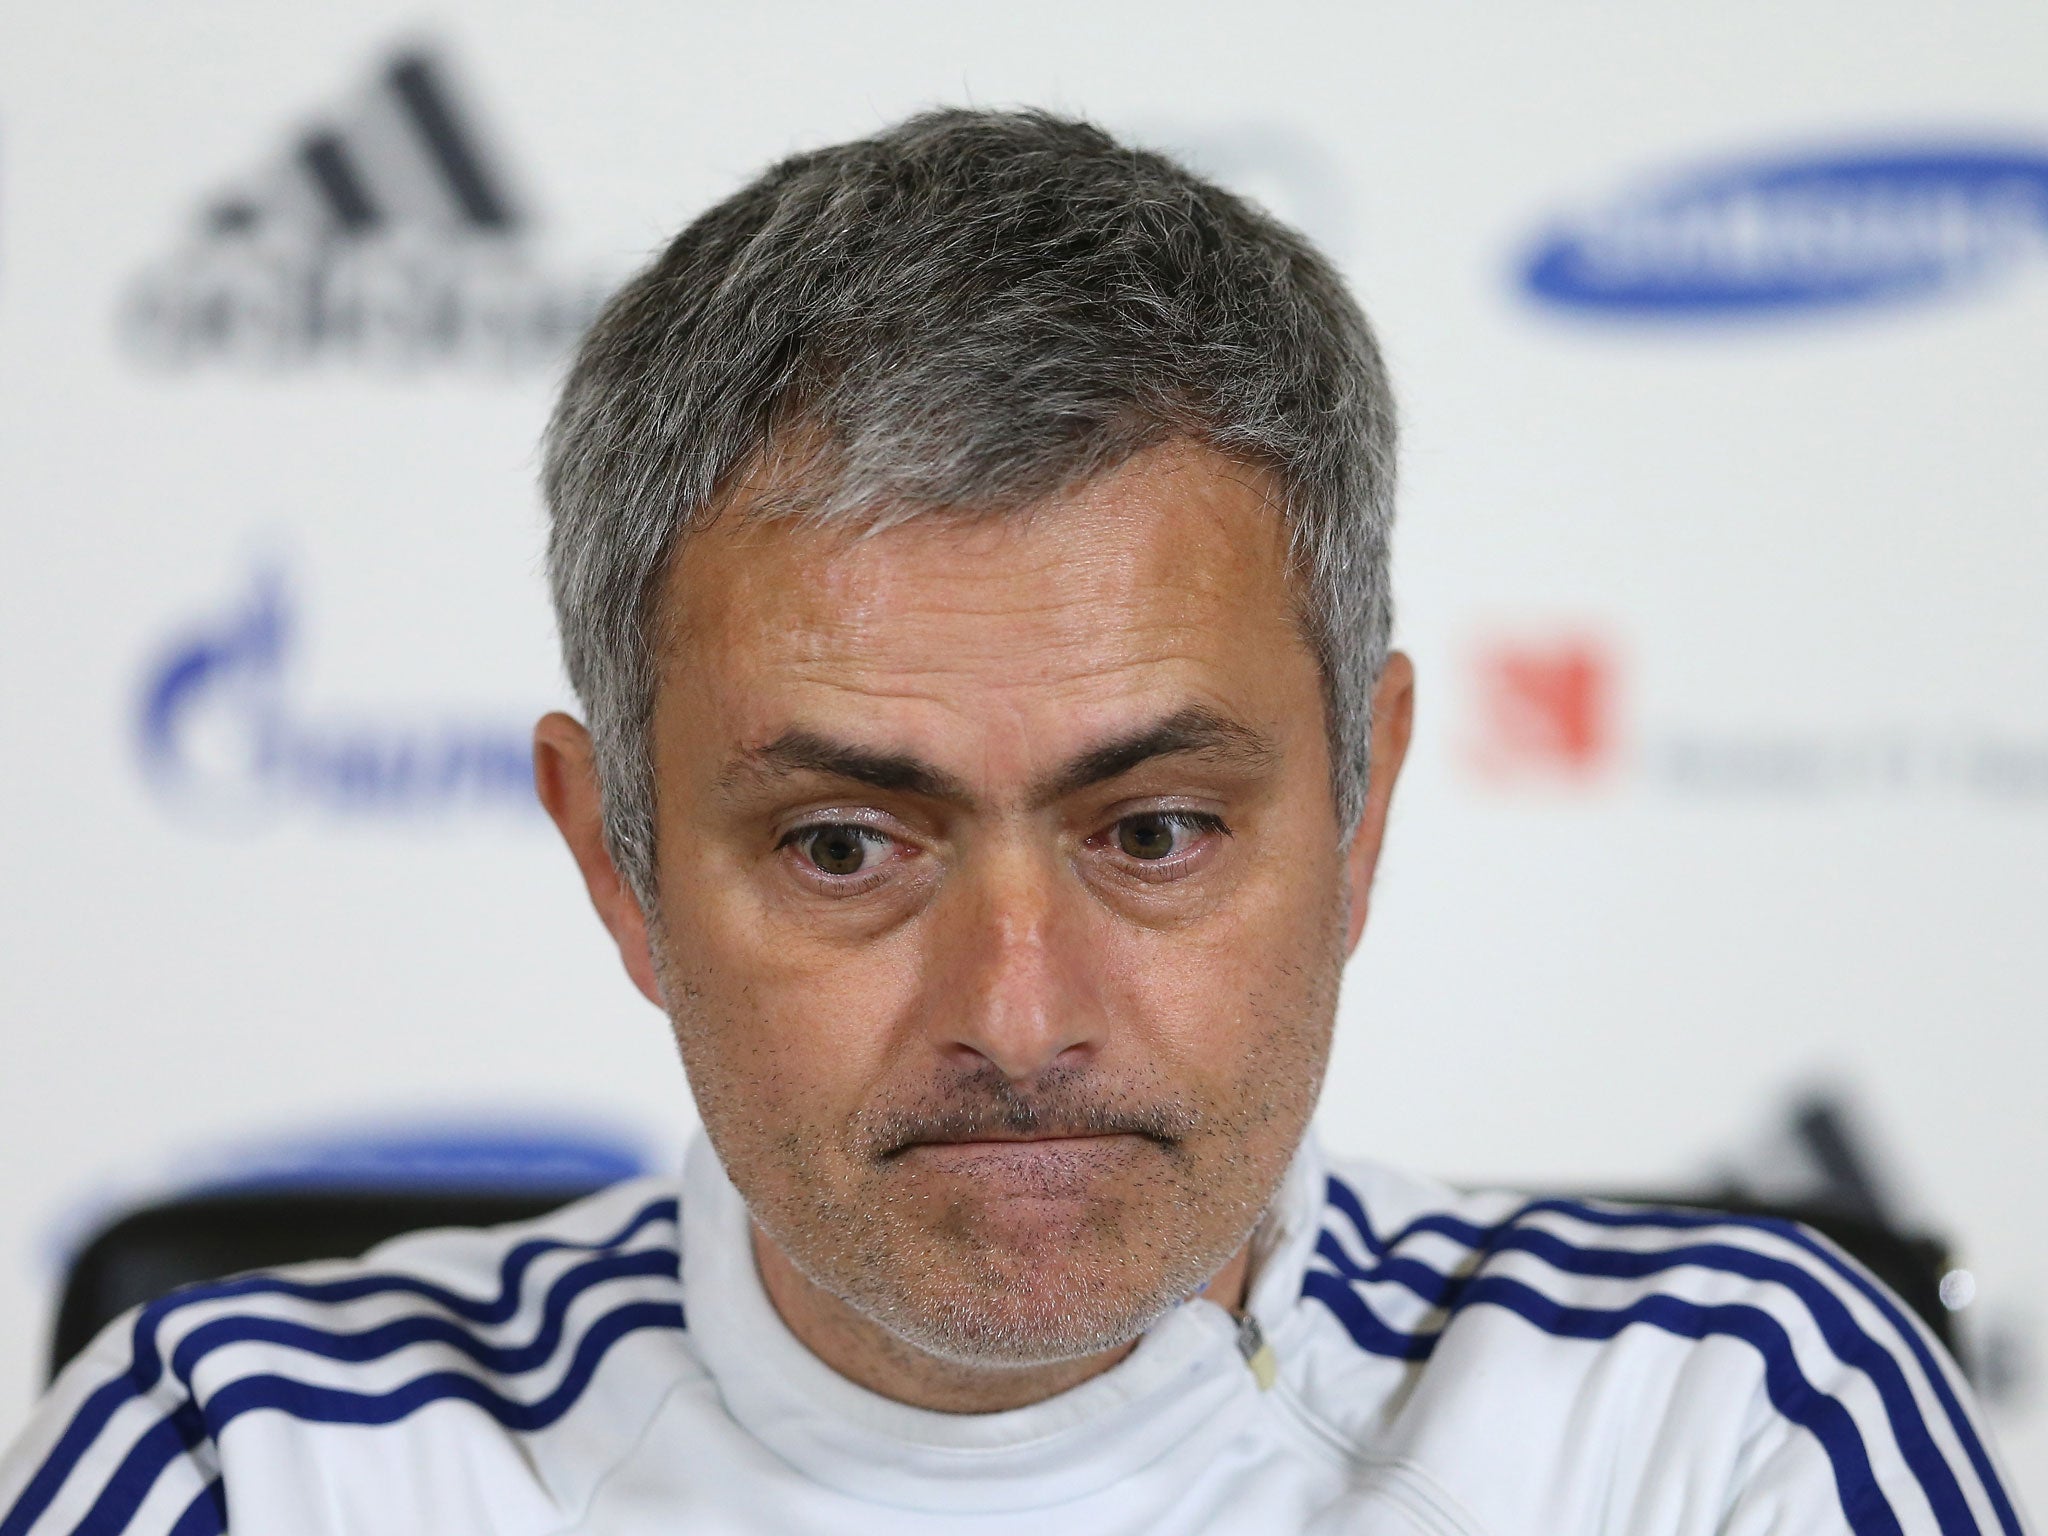 Jose Mourinho revealed that moves for Radamel Falcao and Edinson Cavani were prevented due to Chelsea's compliance with the Financial Fair Play regulations